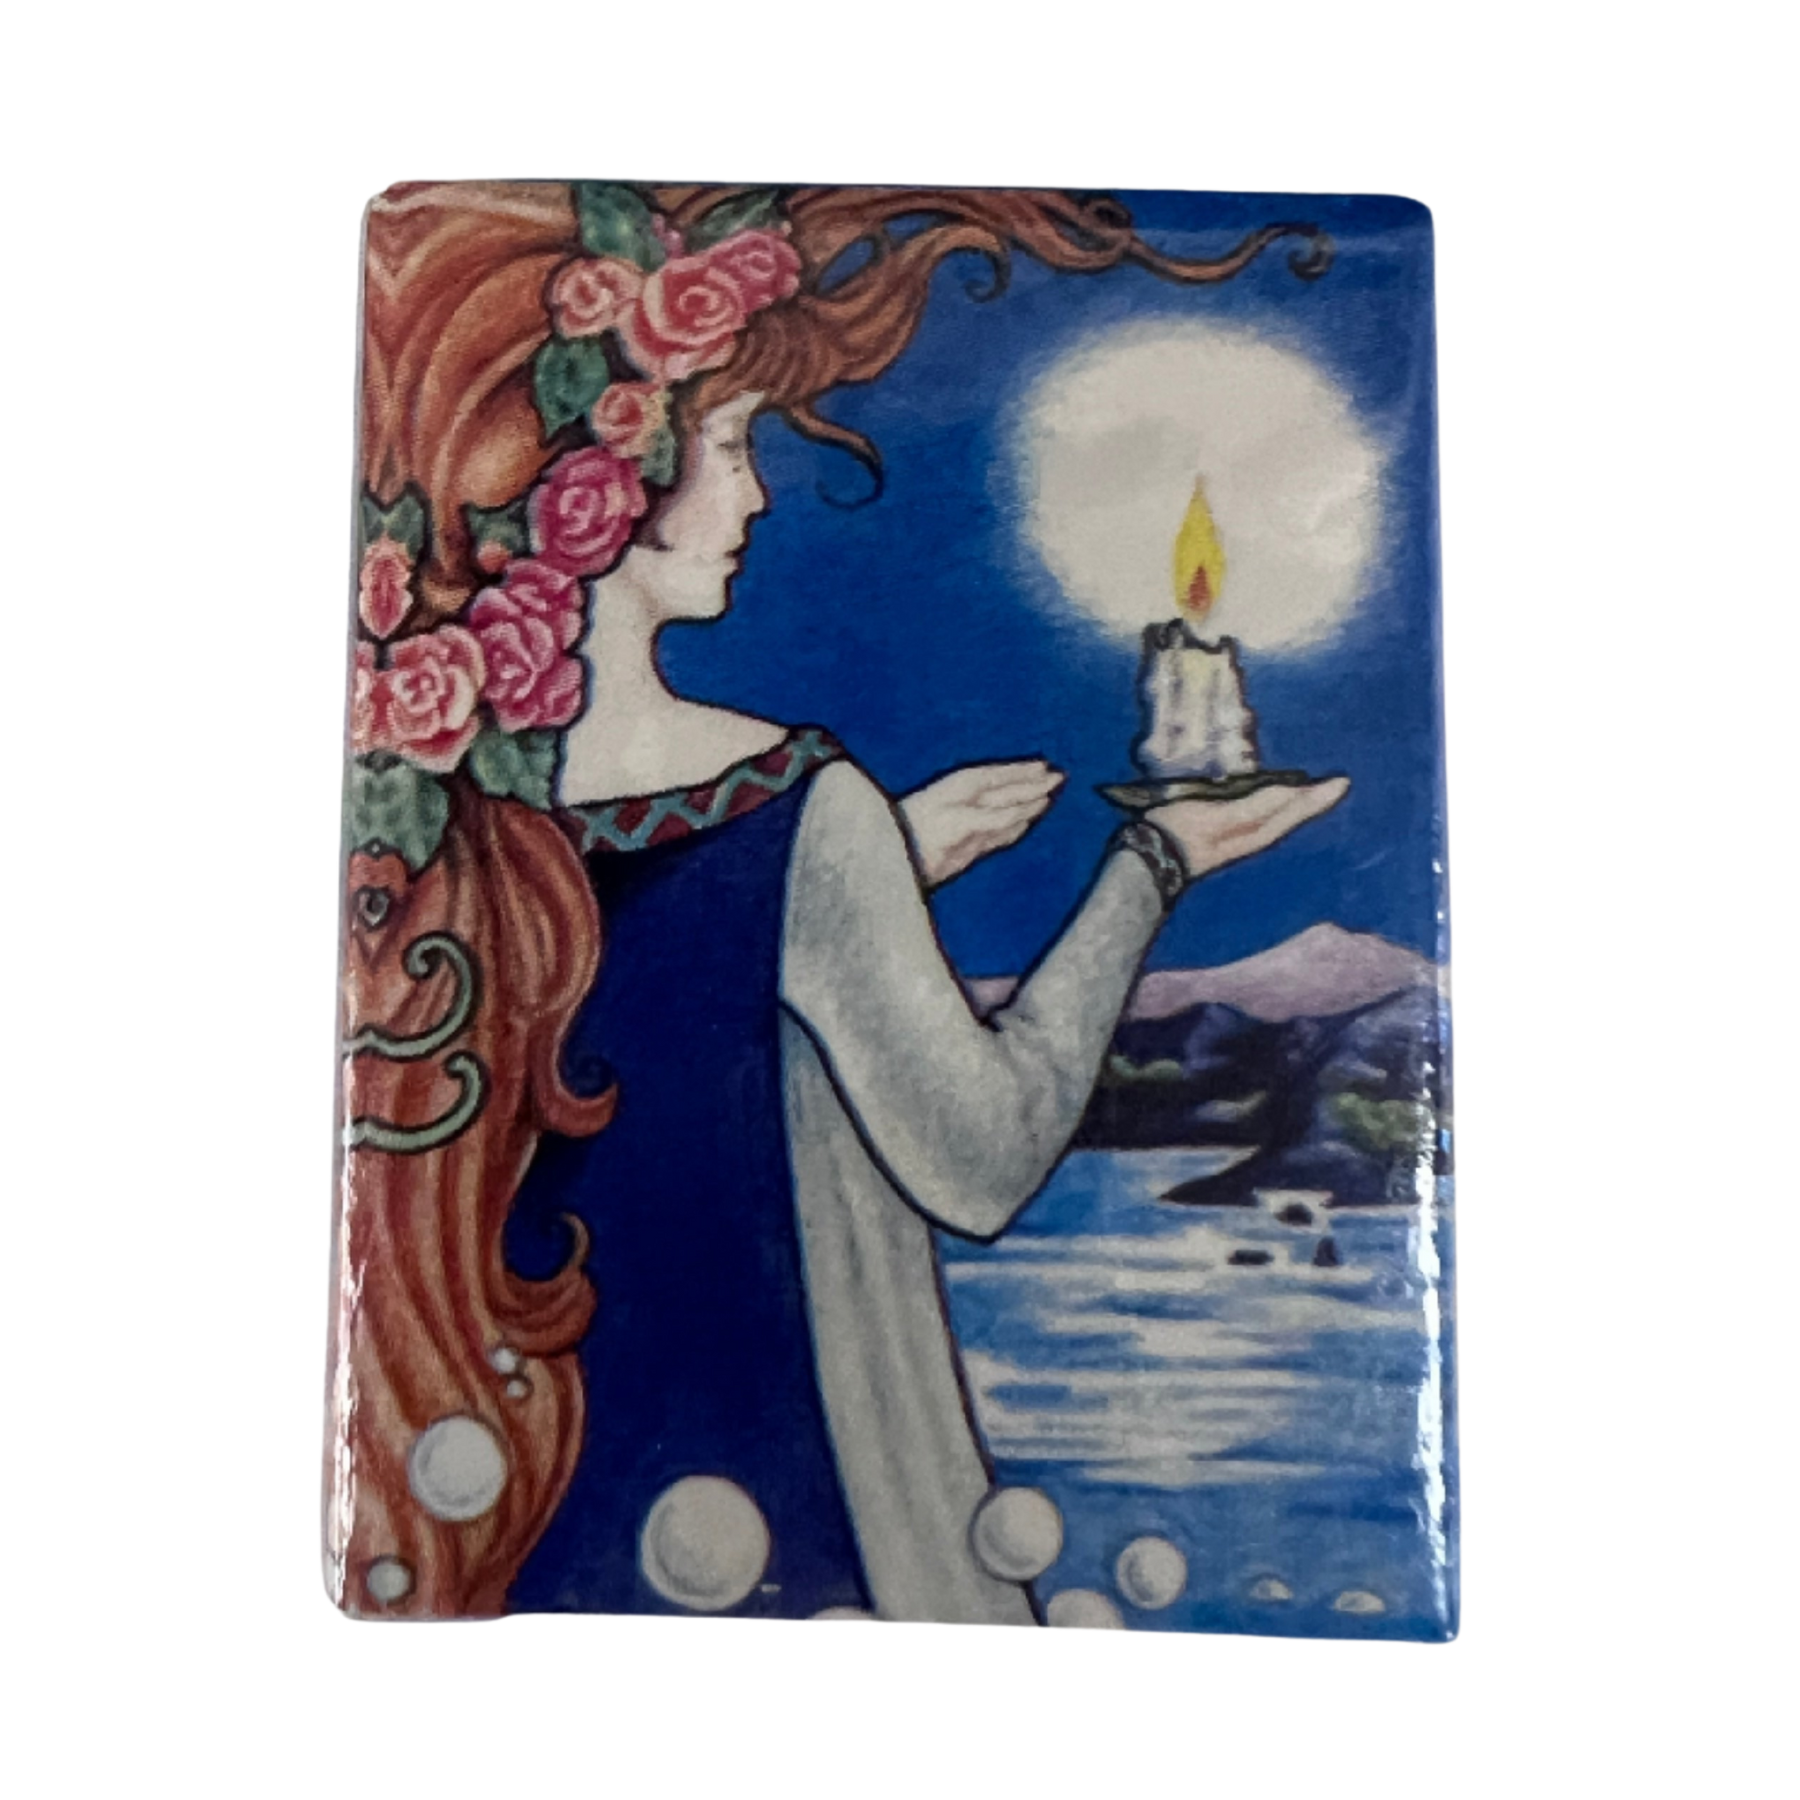 Tiny small box size of matchbook with image of a woman with long brown haired and flowers attached holding a candle on the palm of her hands. 